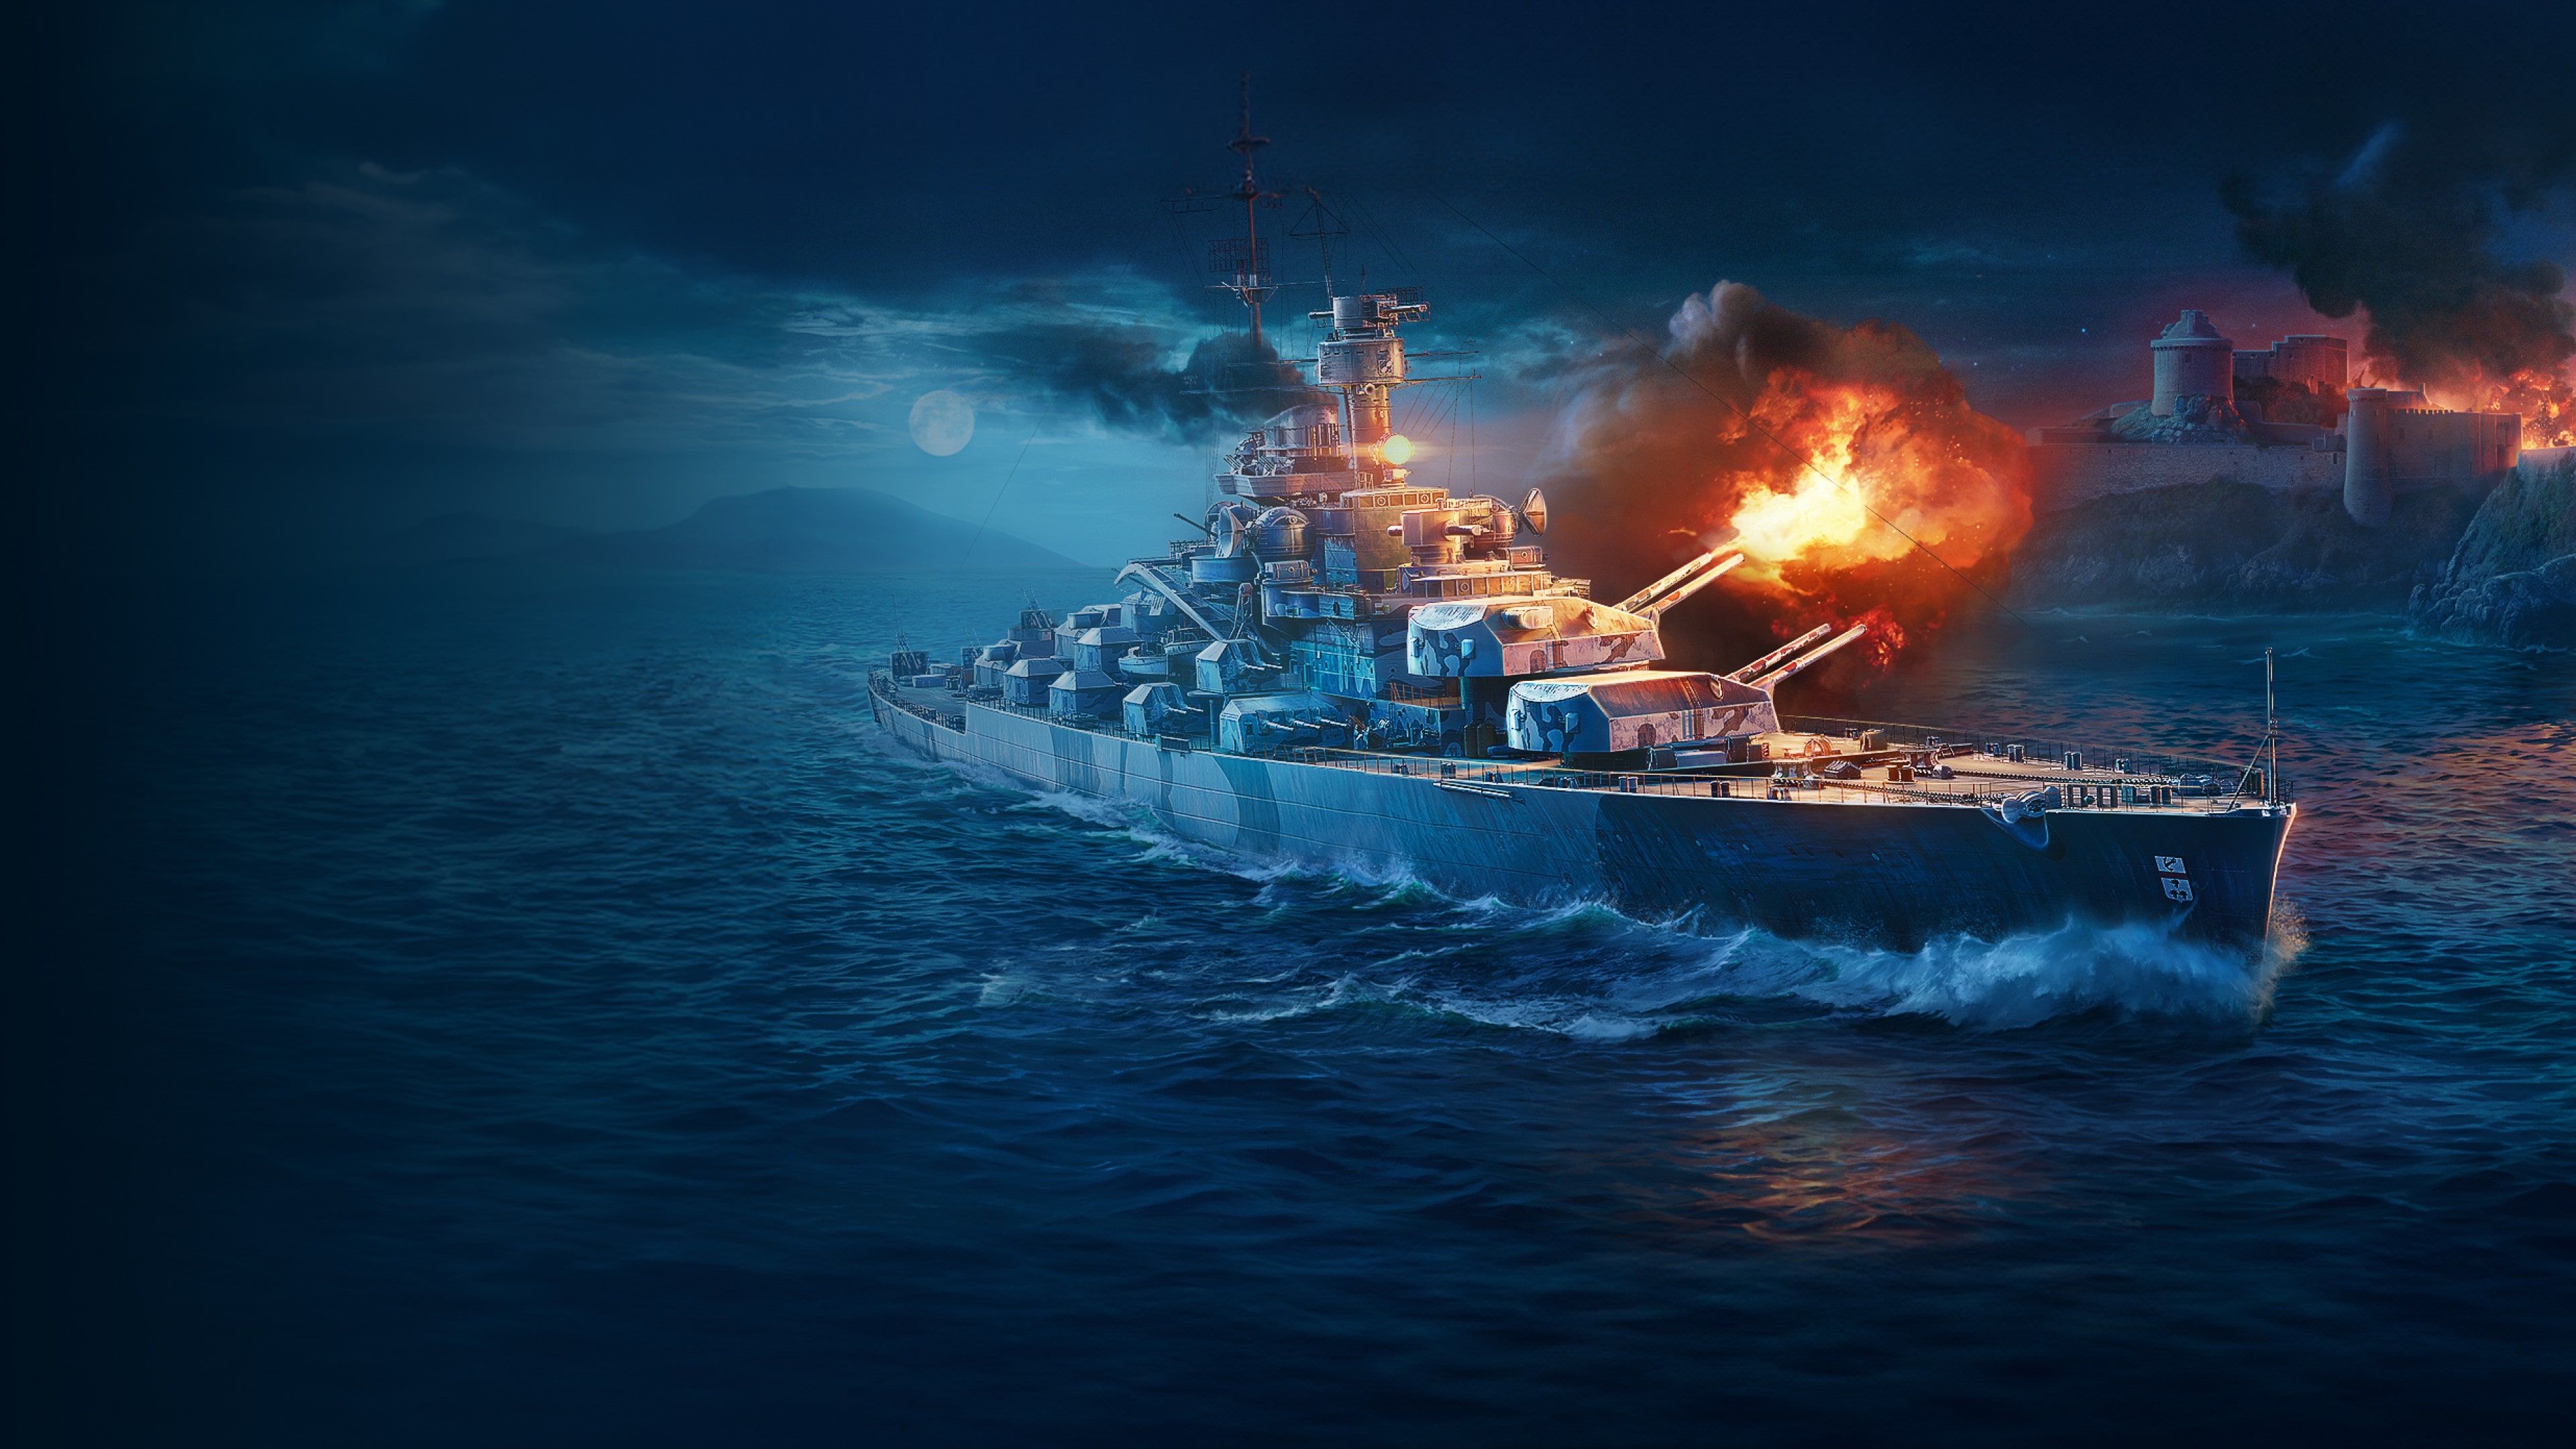 WORLD OF WARSHIPS: LEGENDS (Simplified Chinese, English, Korean, Japanese, Traditional Chinese)